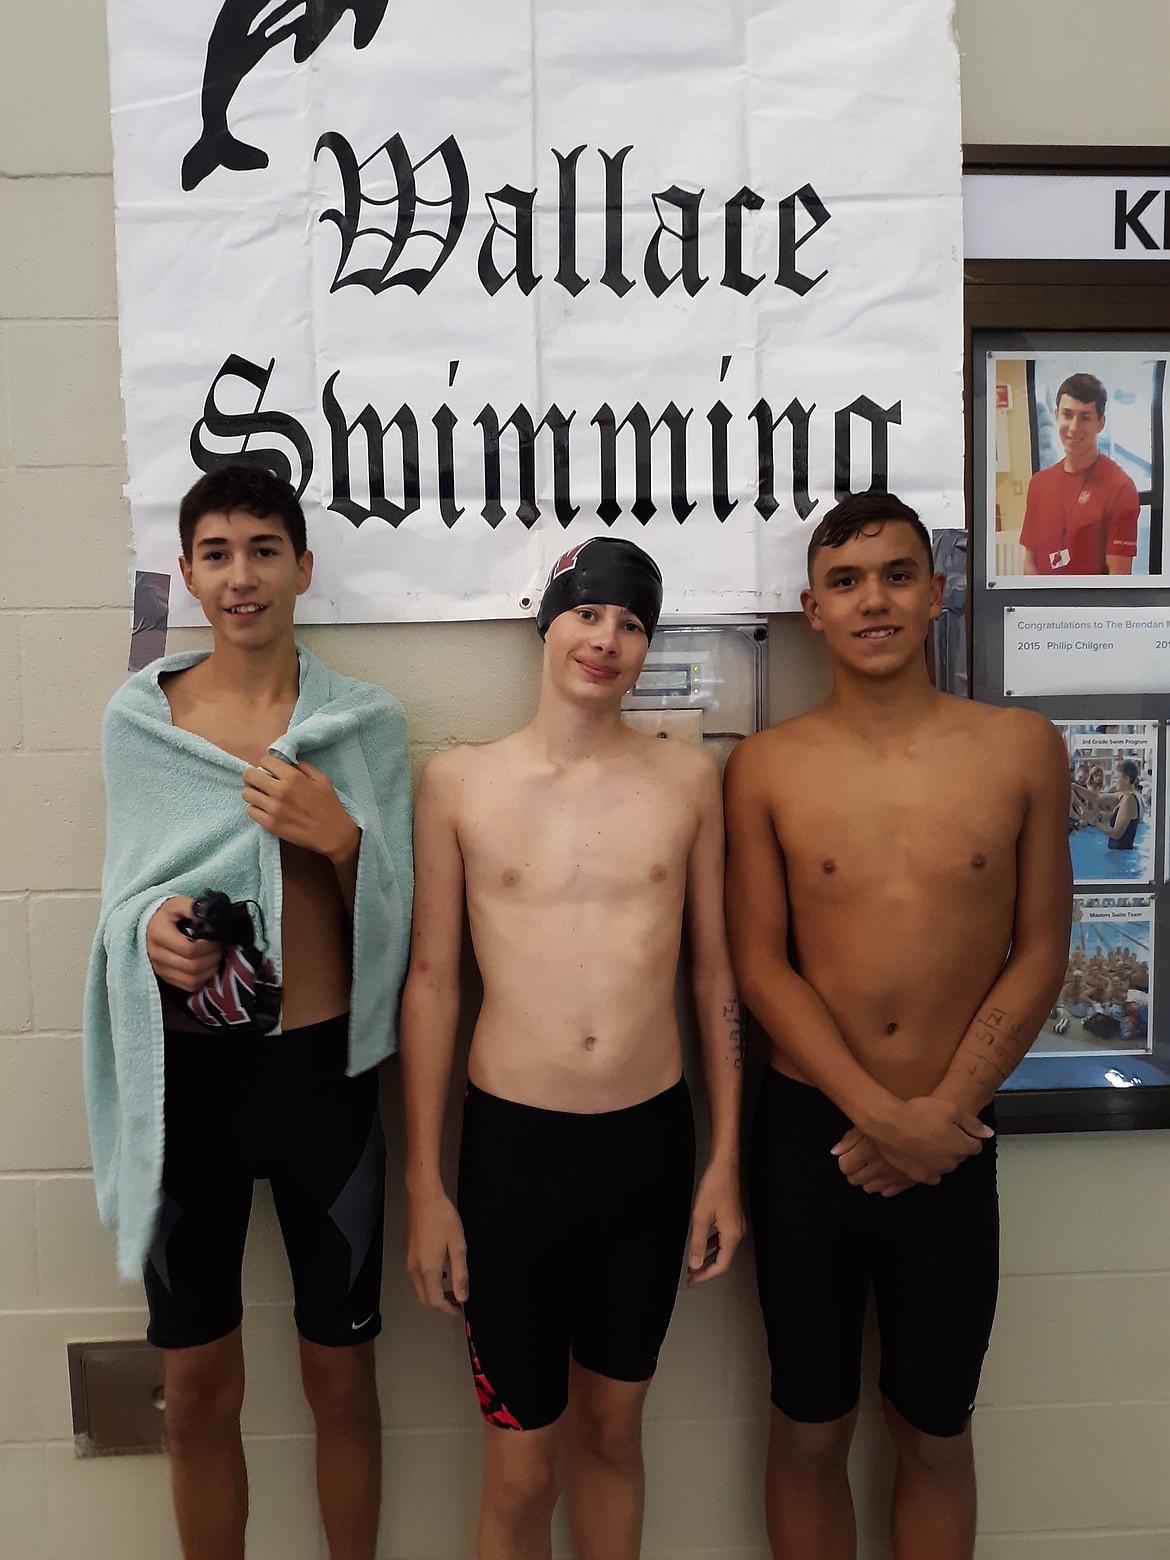 Courtesy photo/ Wallace swimmers Eli Bishop, Izayah Jaramillo, and Dorsey Pearson following their meet at the Kroc Center last week.